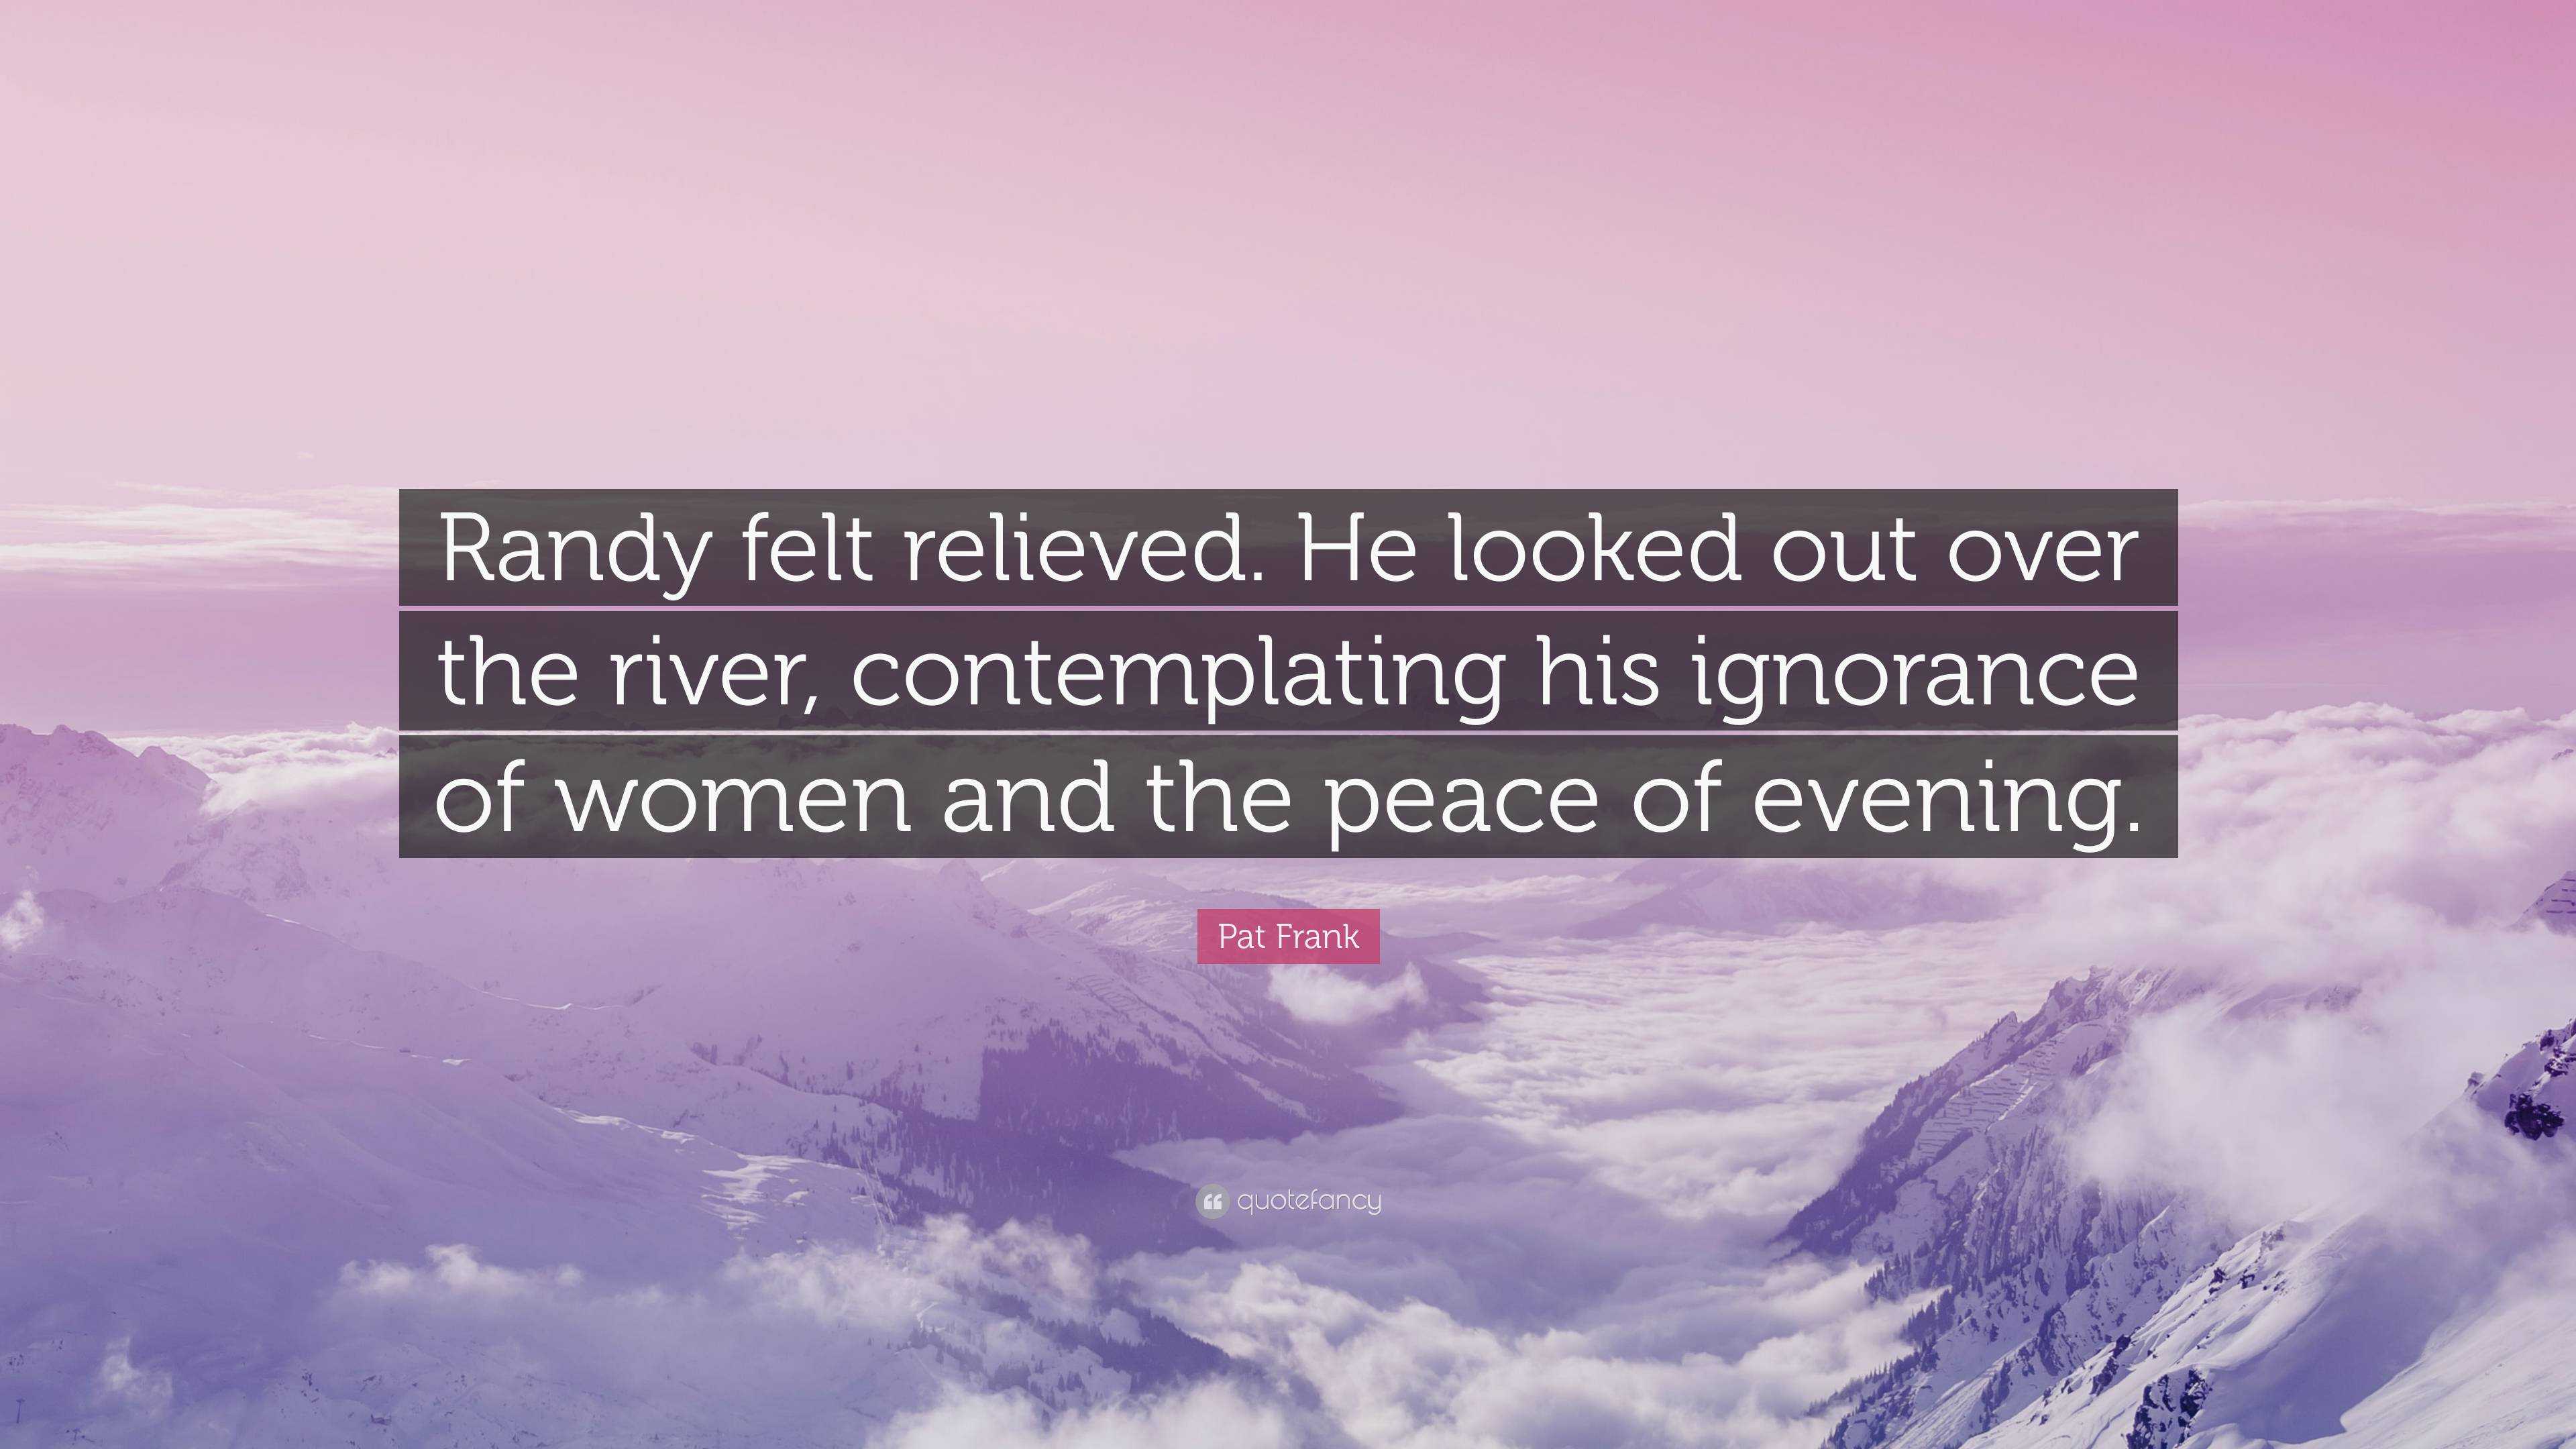 Pat Frank Quote: “Randy felt relieved. He looked out over the